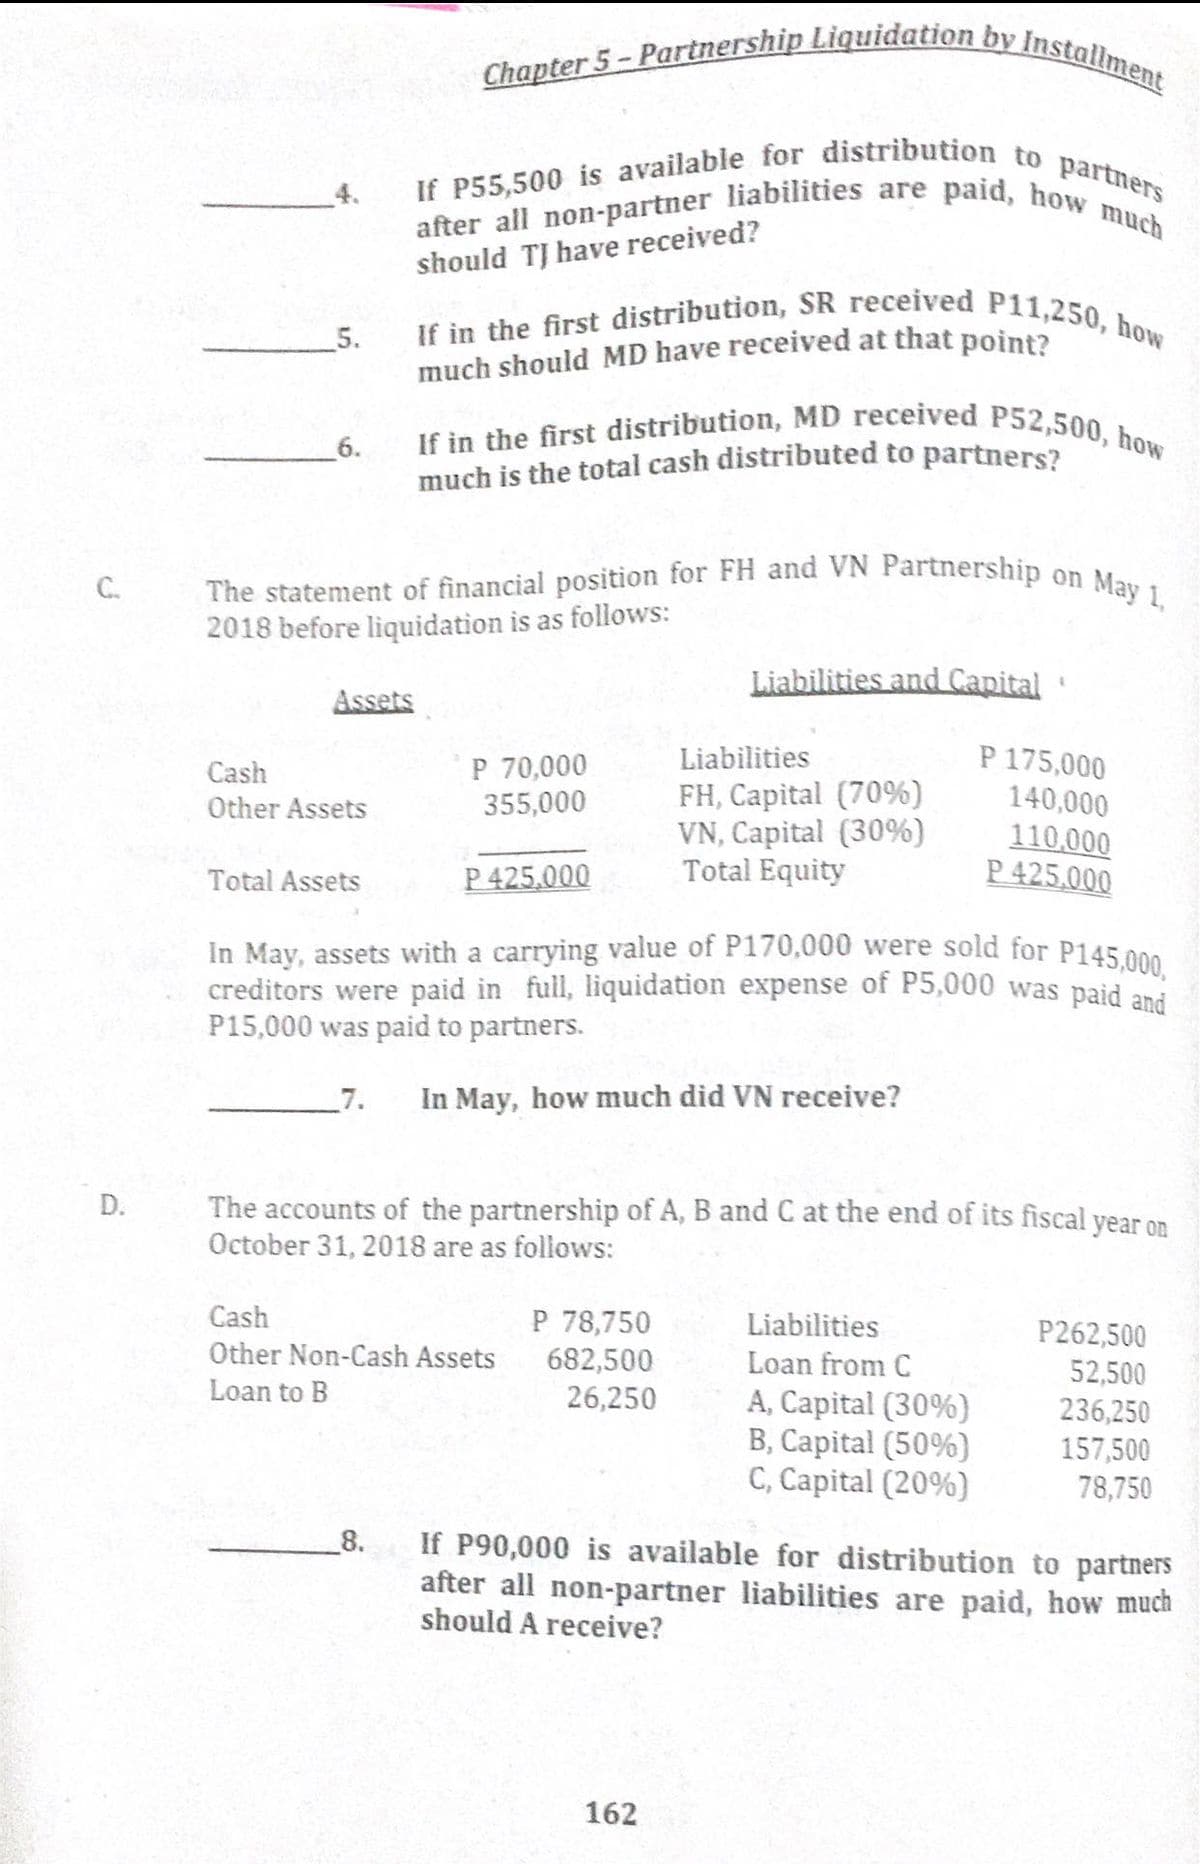 much should MD have received at that point?
The statement of financial position for FH and VN Partnership on May 1,
Chapter 5 - Partnership Liquidation by Installment
If in the first distribution, MD received P52,500, how
If P55,500 is available for distribution to partners
after all non-partner liabilities are paid, how much
If in the first distribution, SR received P11,250, how
should TJ have received?
5.
6.
much is the total cash distributed to partners?
C.
2018 before liquidation is as follows:
Liabilities and Capital
Assets
P 175,000
140,000
Liabilities
P 70,000
355,000
Cash
FH, Capital (70%)
VN, Capital (30%)
Total Equity
Other Assets
110,000
P 425,000
Total Assets
P 425,000
In May, assets with a carrying value of P170,000 were sold for P145.000
creditors were paid in full, liquidation expense of P5,000 was paid ani
P15,000 was paid to partners.
7.
In May, how much did VN receive?
The accounts of the partnership of A, B and C at the end of its fiscal year on
October 31, 2018 are as follows:
Cash
P 78,750
Liabilities
P262,500
Other Non-Cash Assets
682,500
26,250
Loan from C
52,500
236,250
157,500
78,750
Loan to B
A, Capital (30%)
B, Capital (50%)
C, Capital (20%)
If P90,000 is available for distribution to partners
after all non-partner liabilities are paid, how much
should A receive?
8.
162
D.
